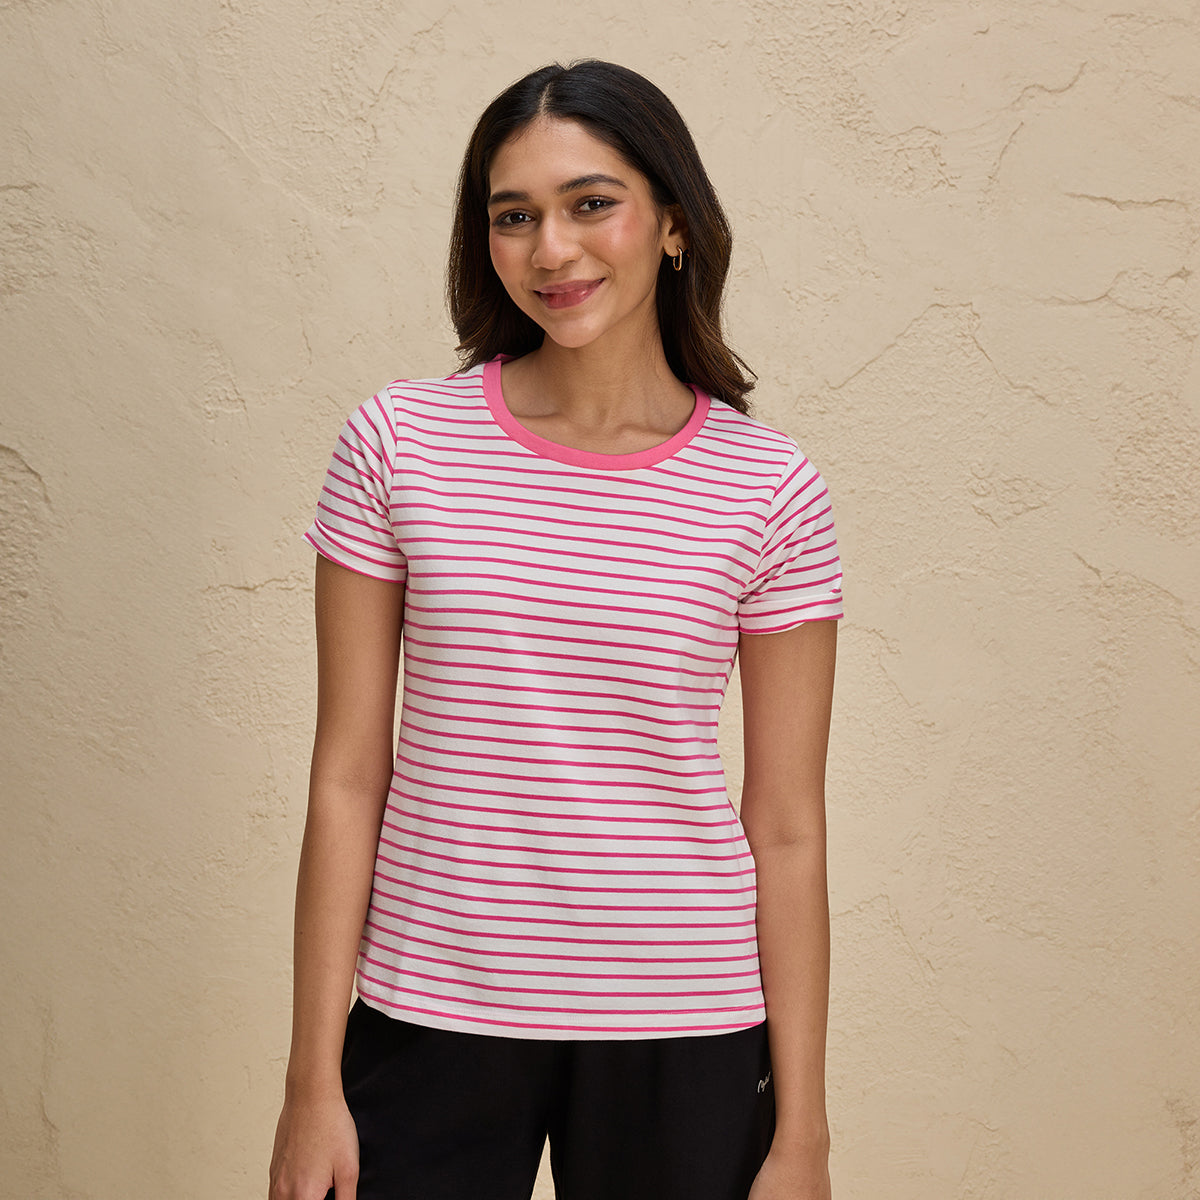 Nykd By Nykaa Breathable Cotton Tee with 2 Degree Cooling Tech-NYLE605-Pink White Stripe